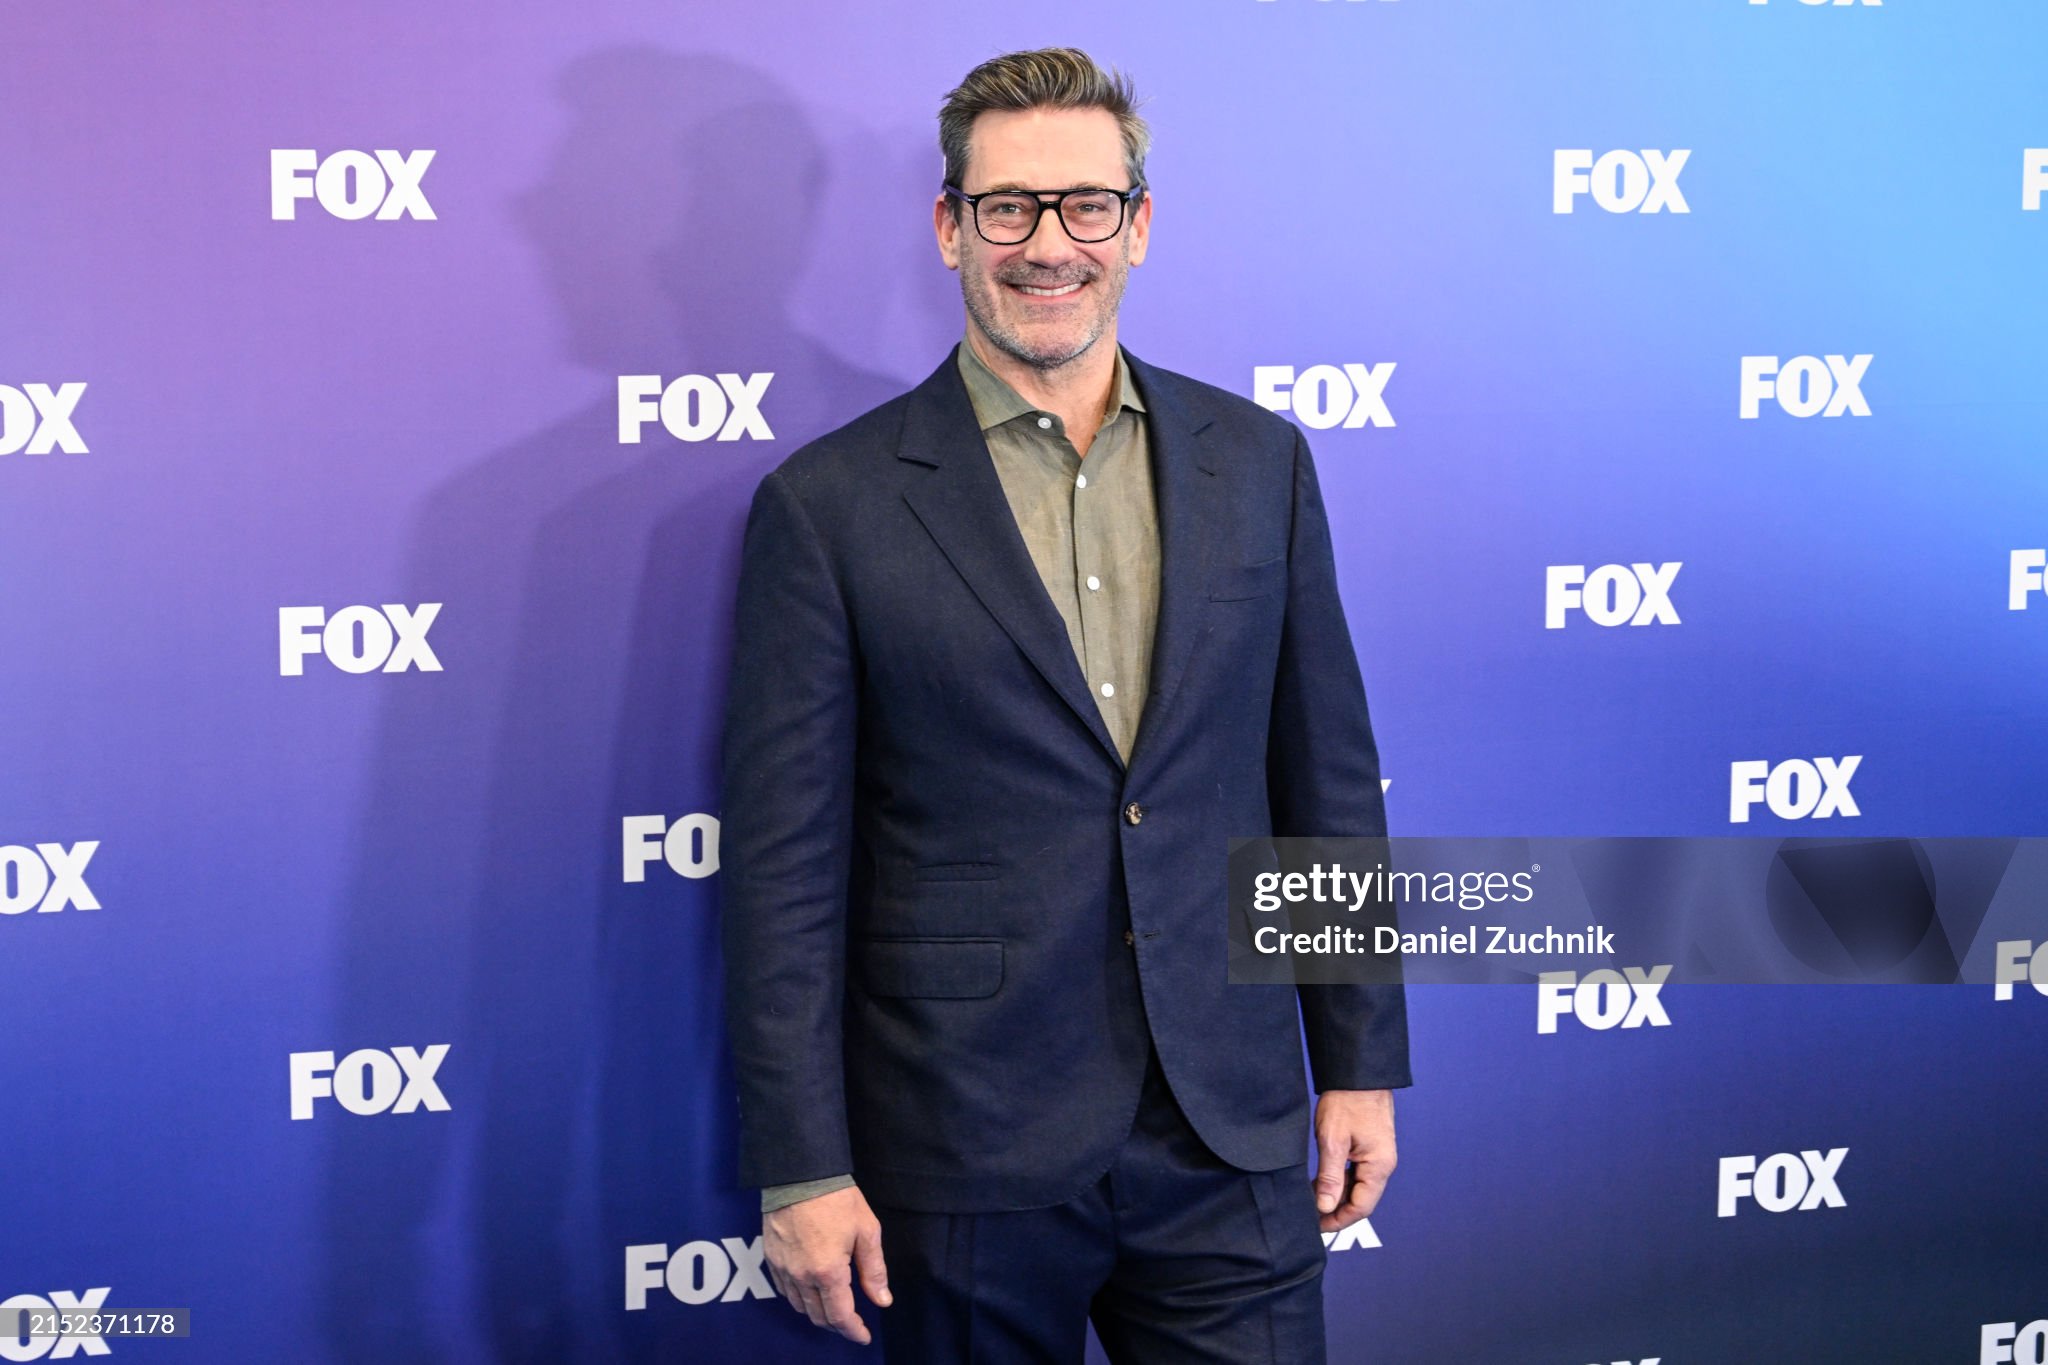 gettyimages-2152371178-2048x2048.jpg